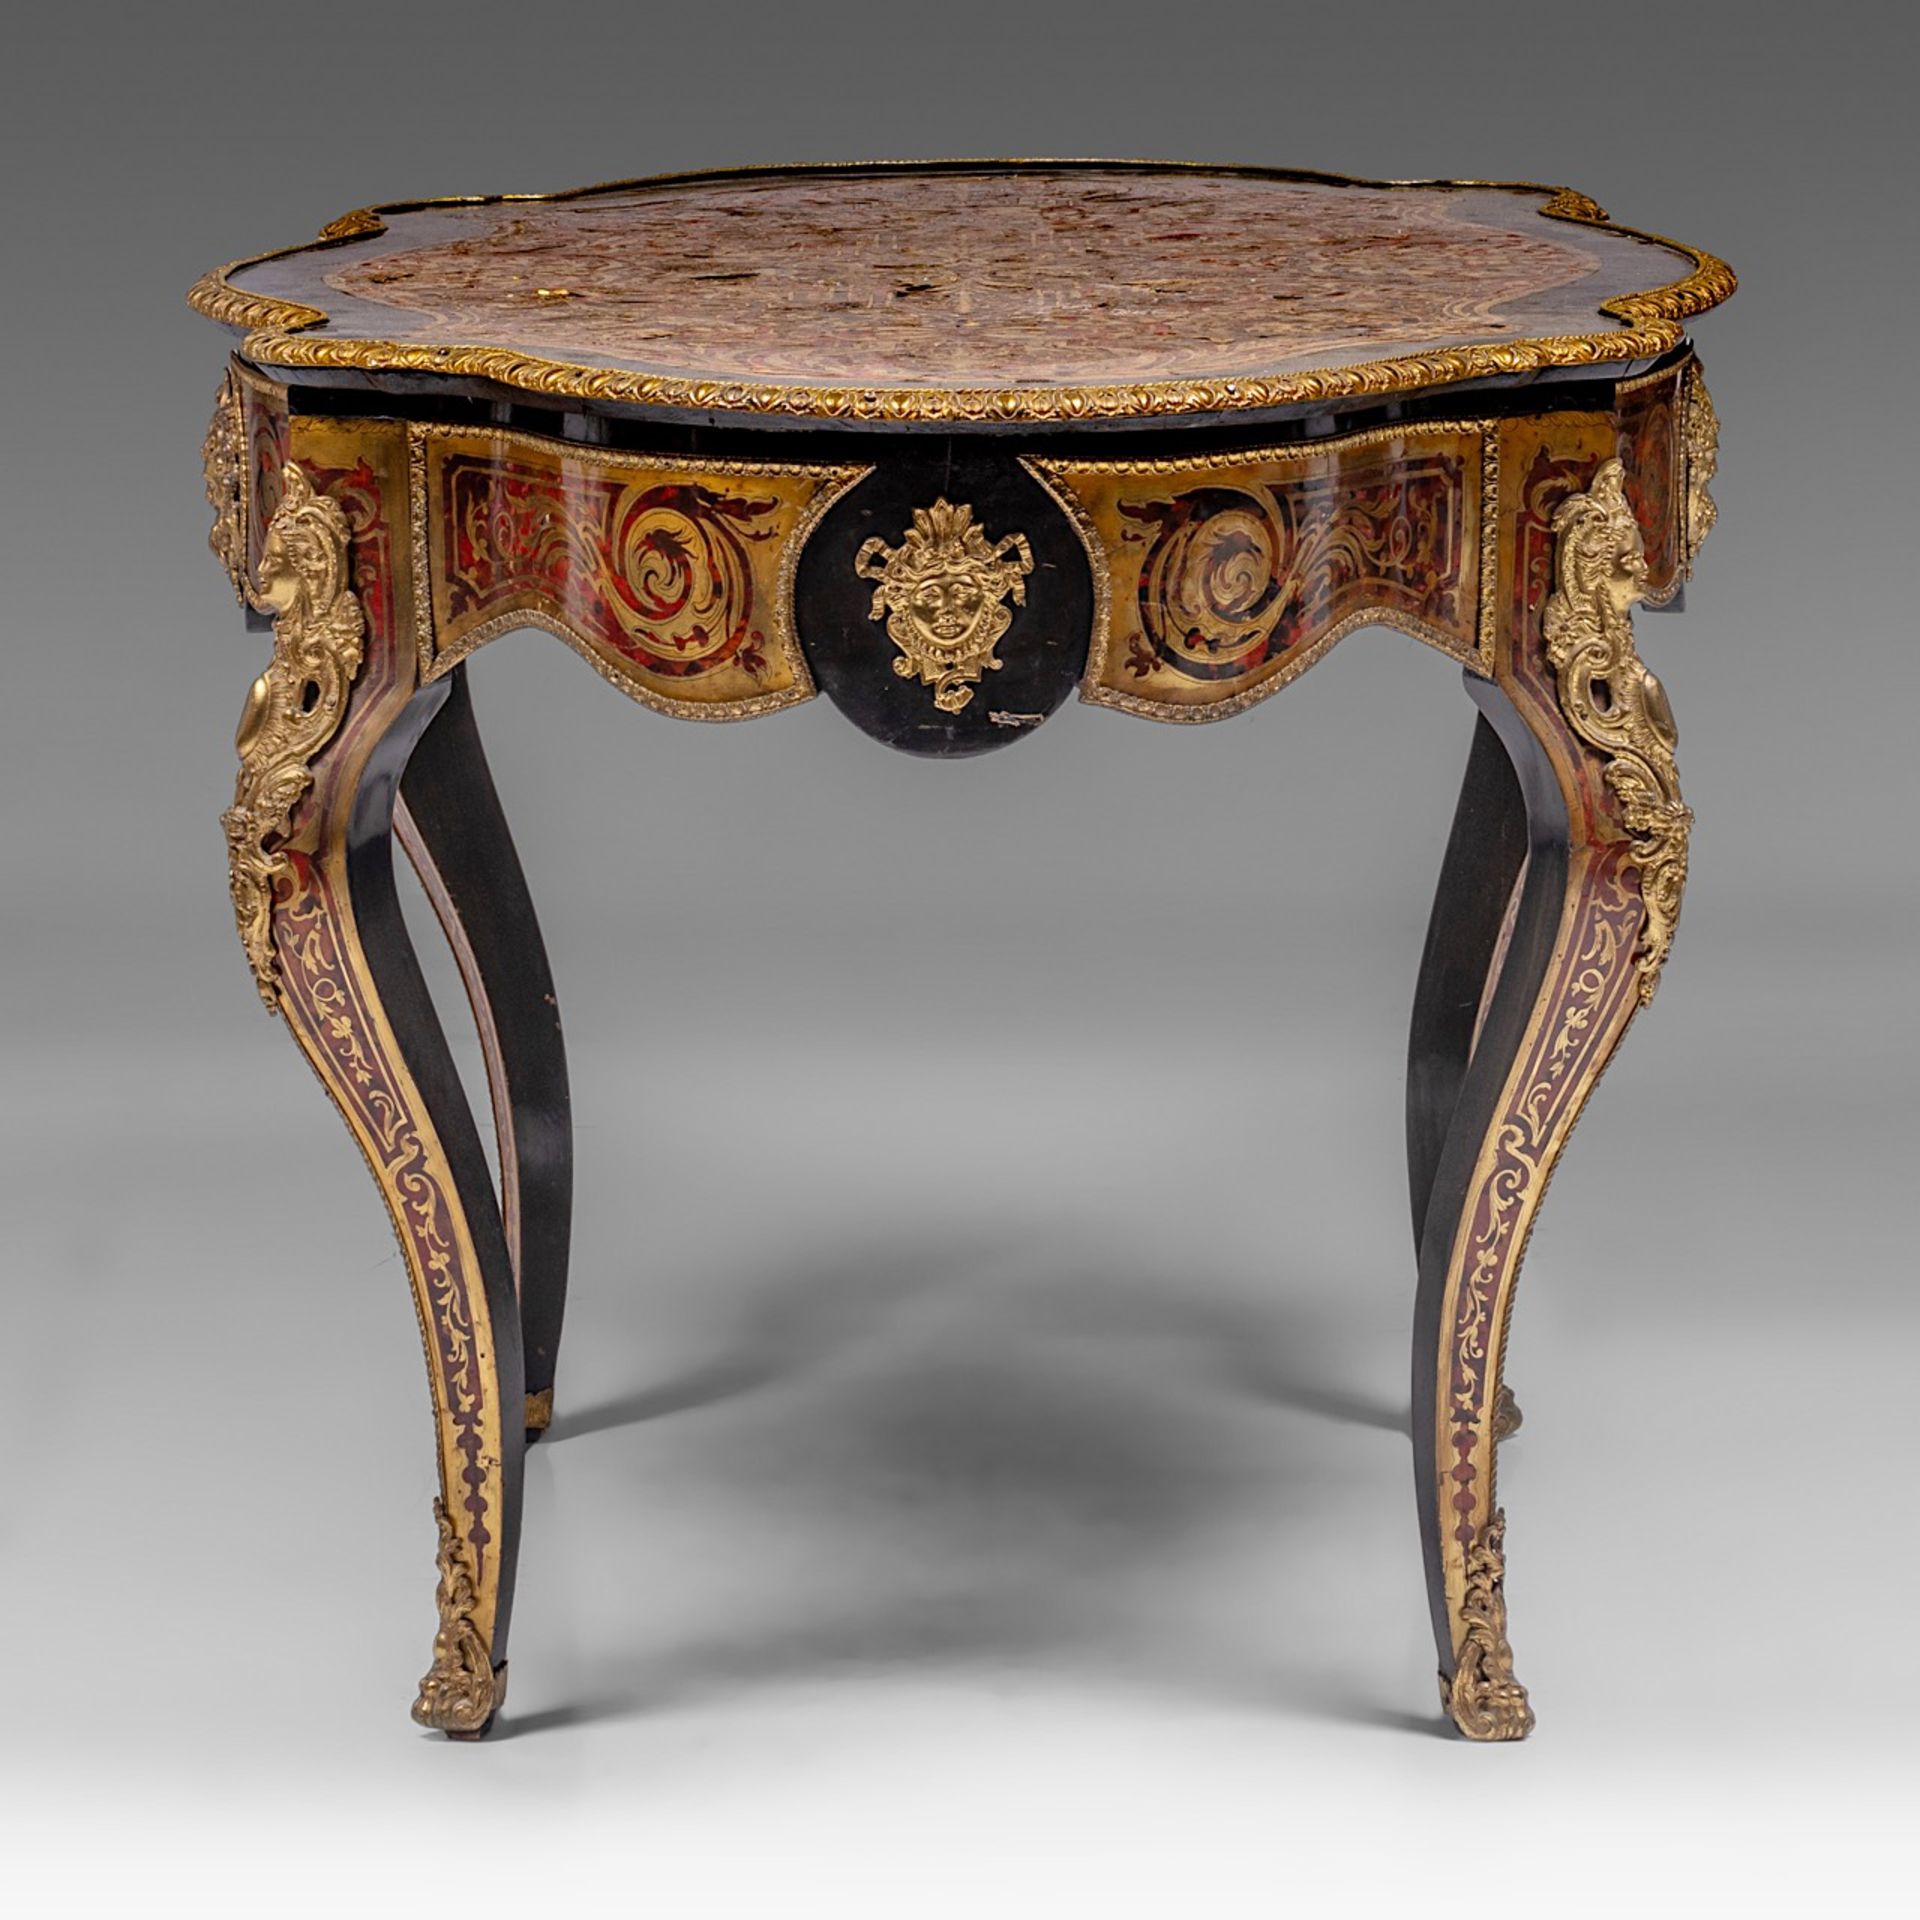 A Napoleon III Boulle work centre table with gilt bronze mounts, late 19thC, H 79 - W 146 - D 90 cm - Image 5 of 12